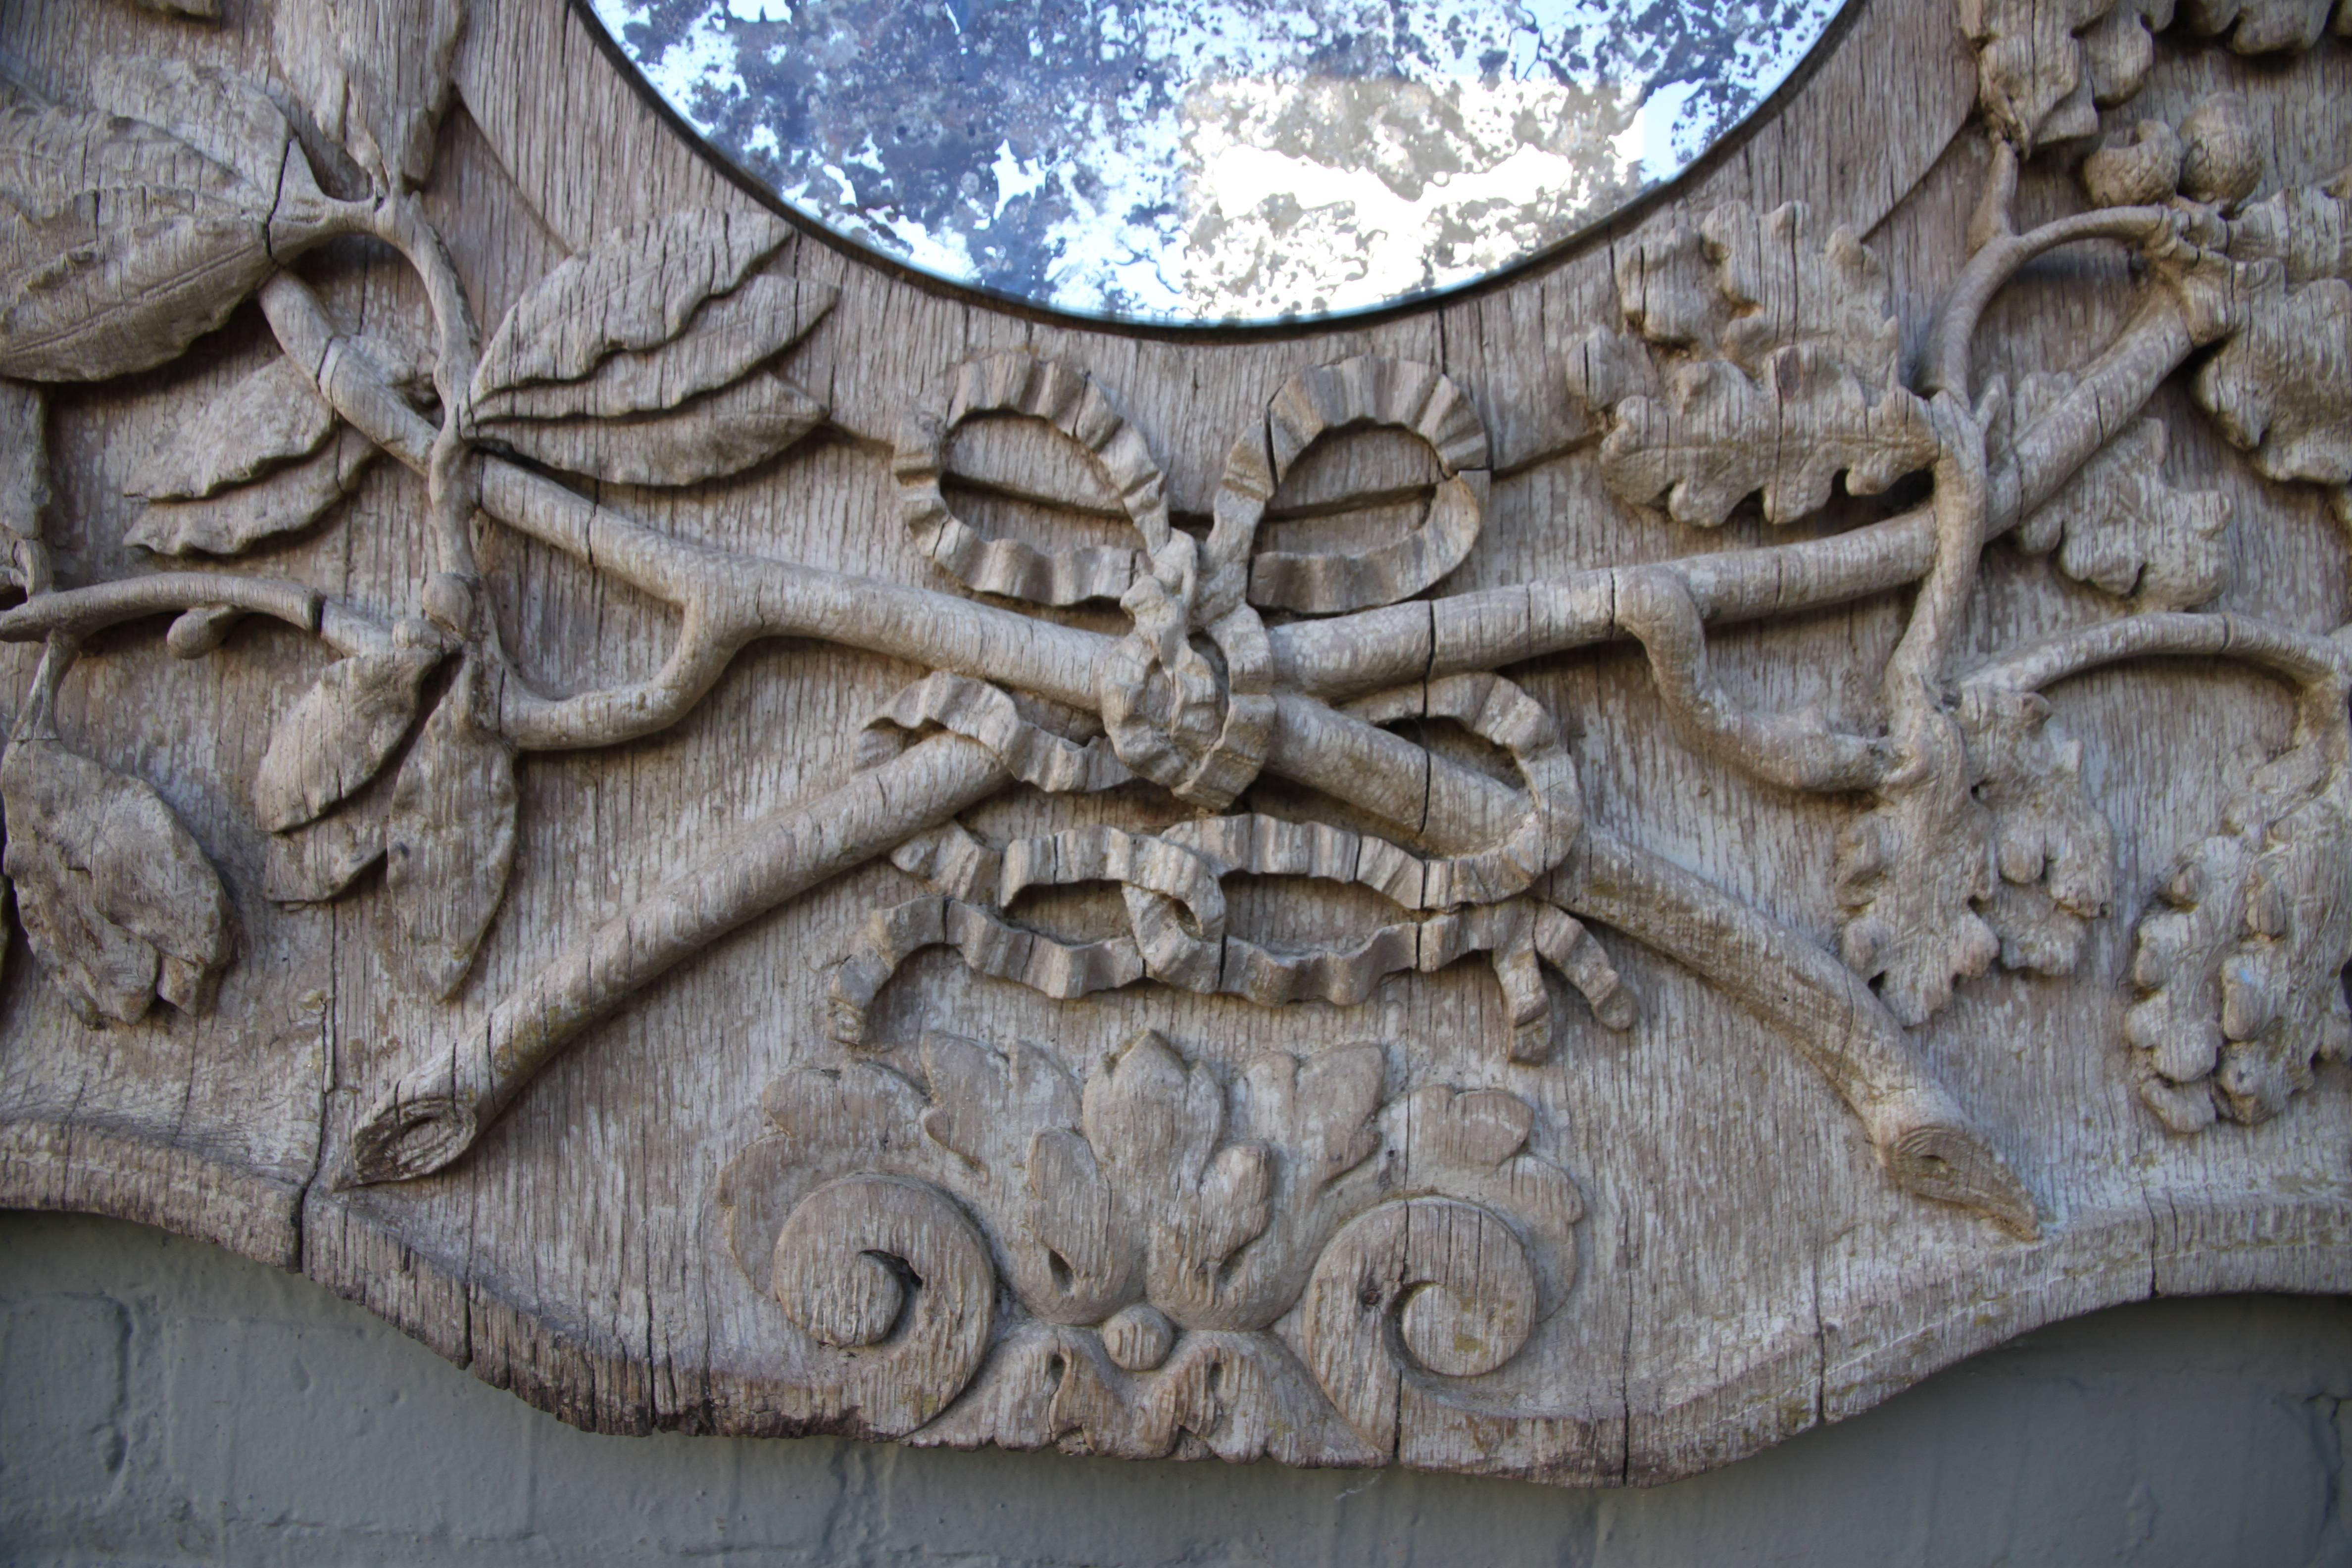 19th century Italian mirror with hand-carved oak leaves throughout. Mirror has antiqued glass.